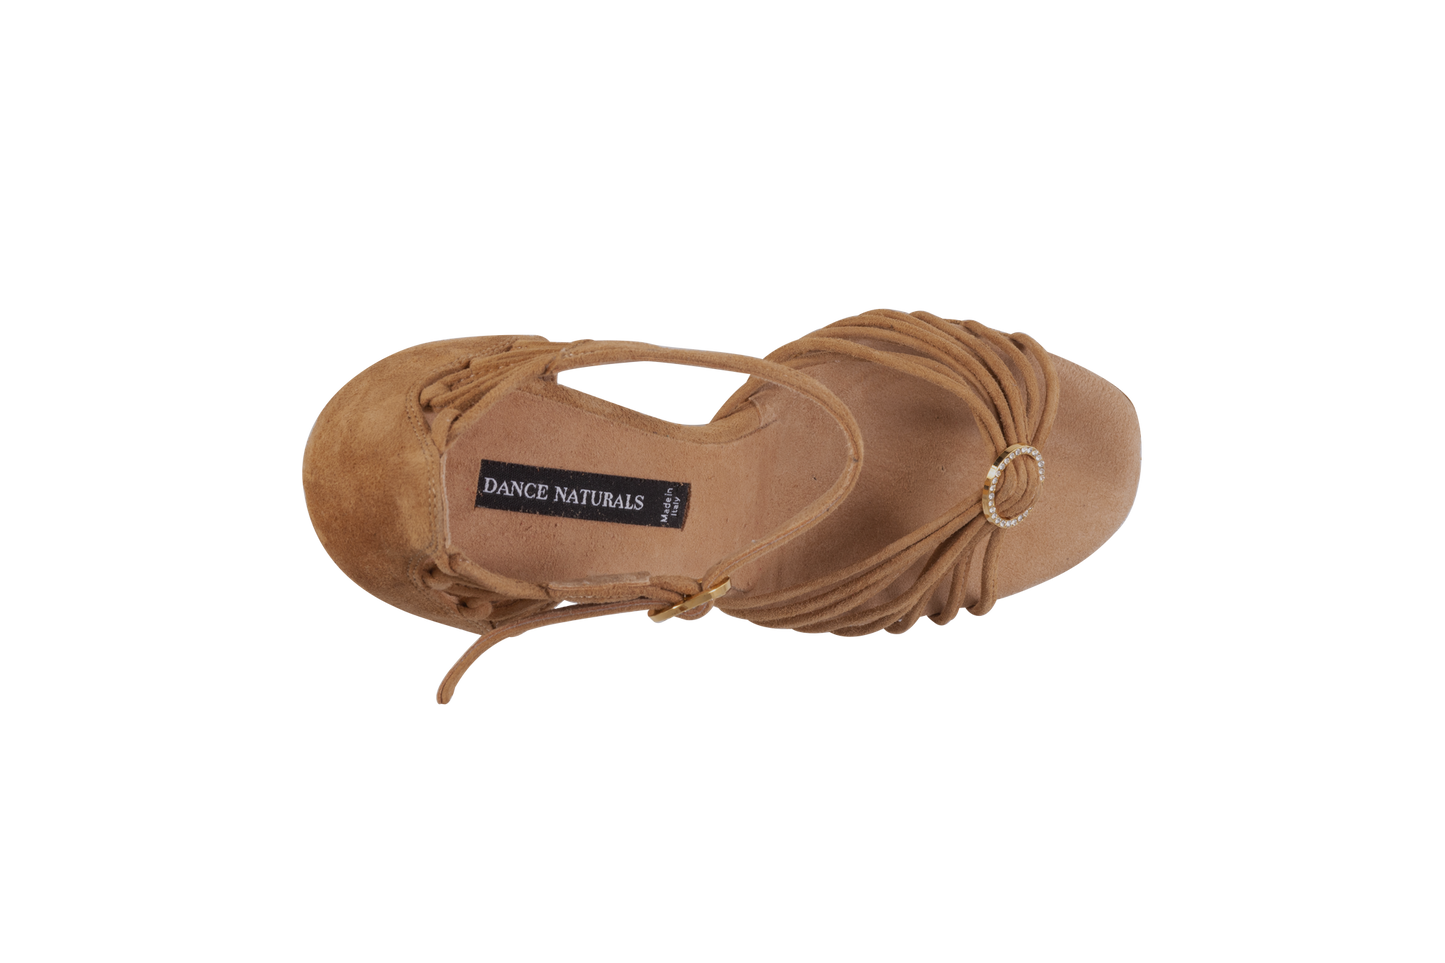 Dance Naturals 883/884 Venere Tan Suede Multi-Strap Latin Shoe with Swarovski Buckles and Flower-Shaped Embellishment on Heel